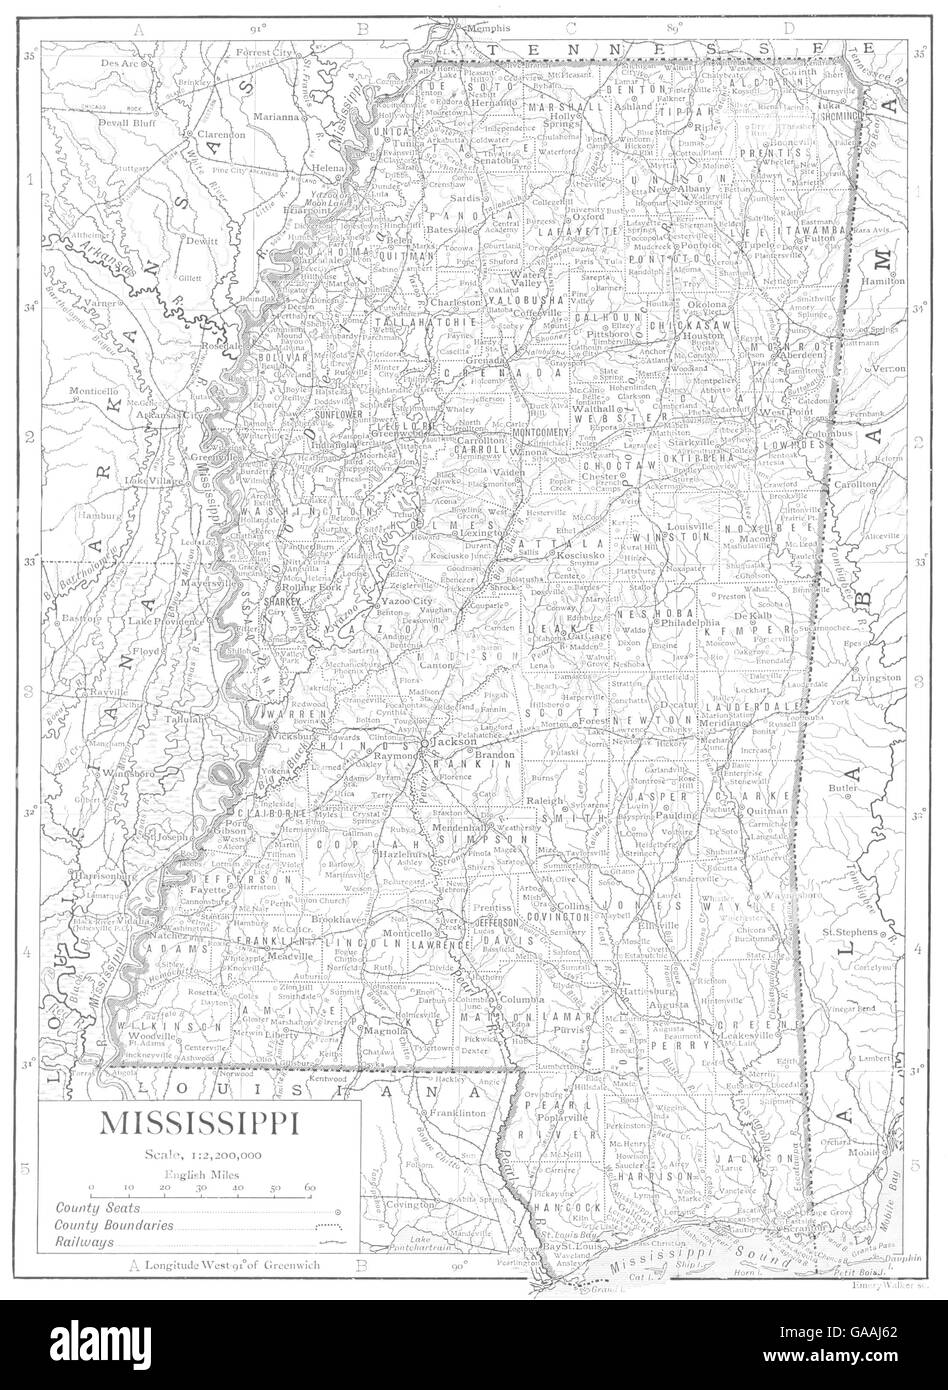 MISSISSIPPI: Mississippi state map showing counties, 1910 Stock Photo